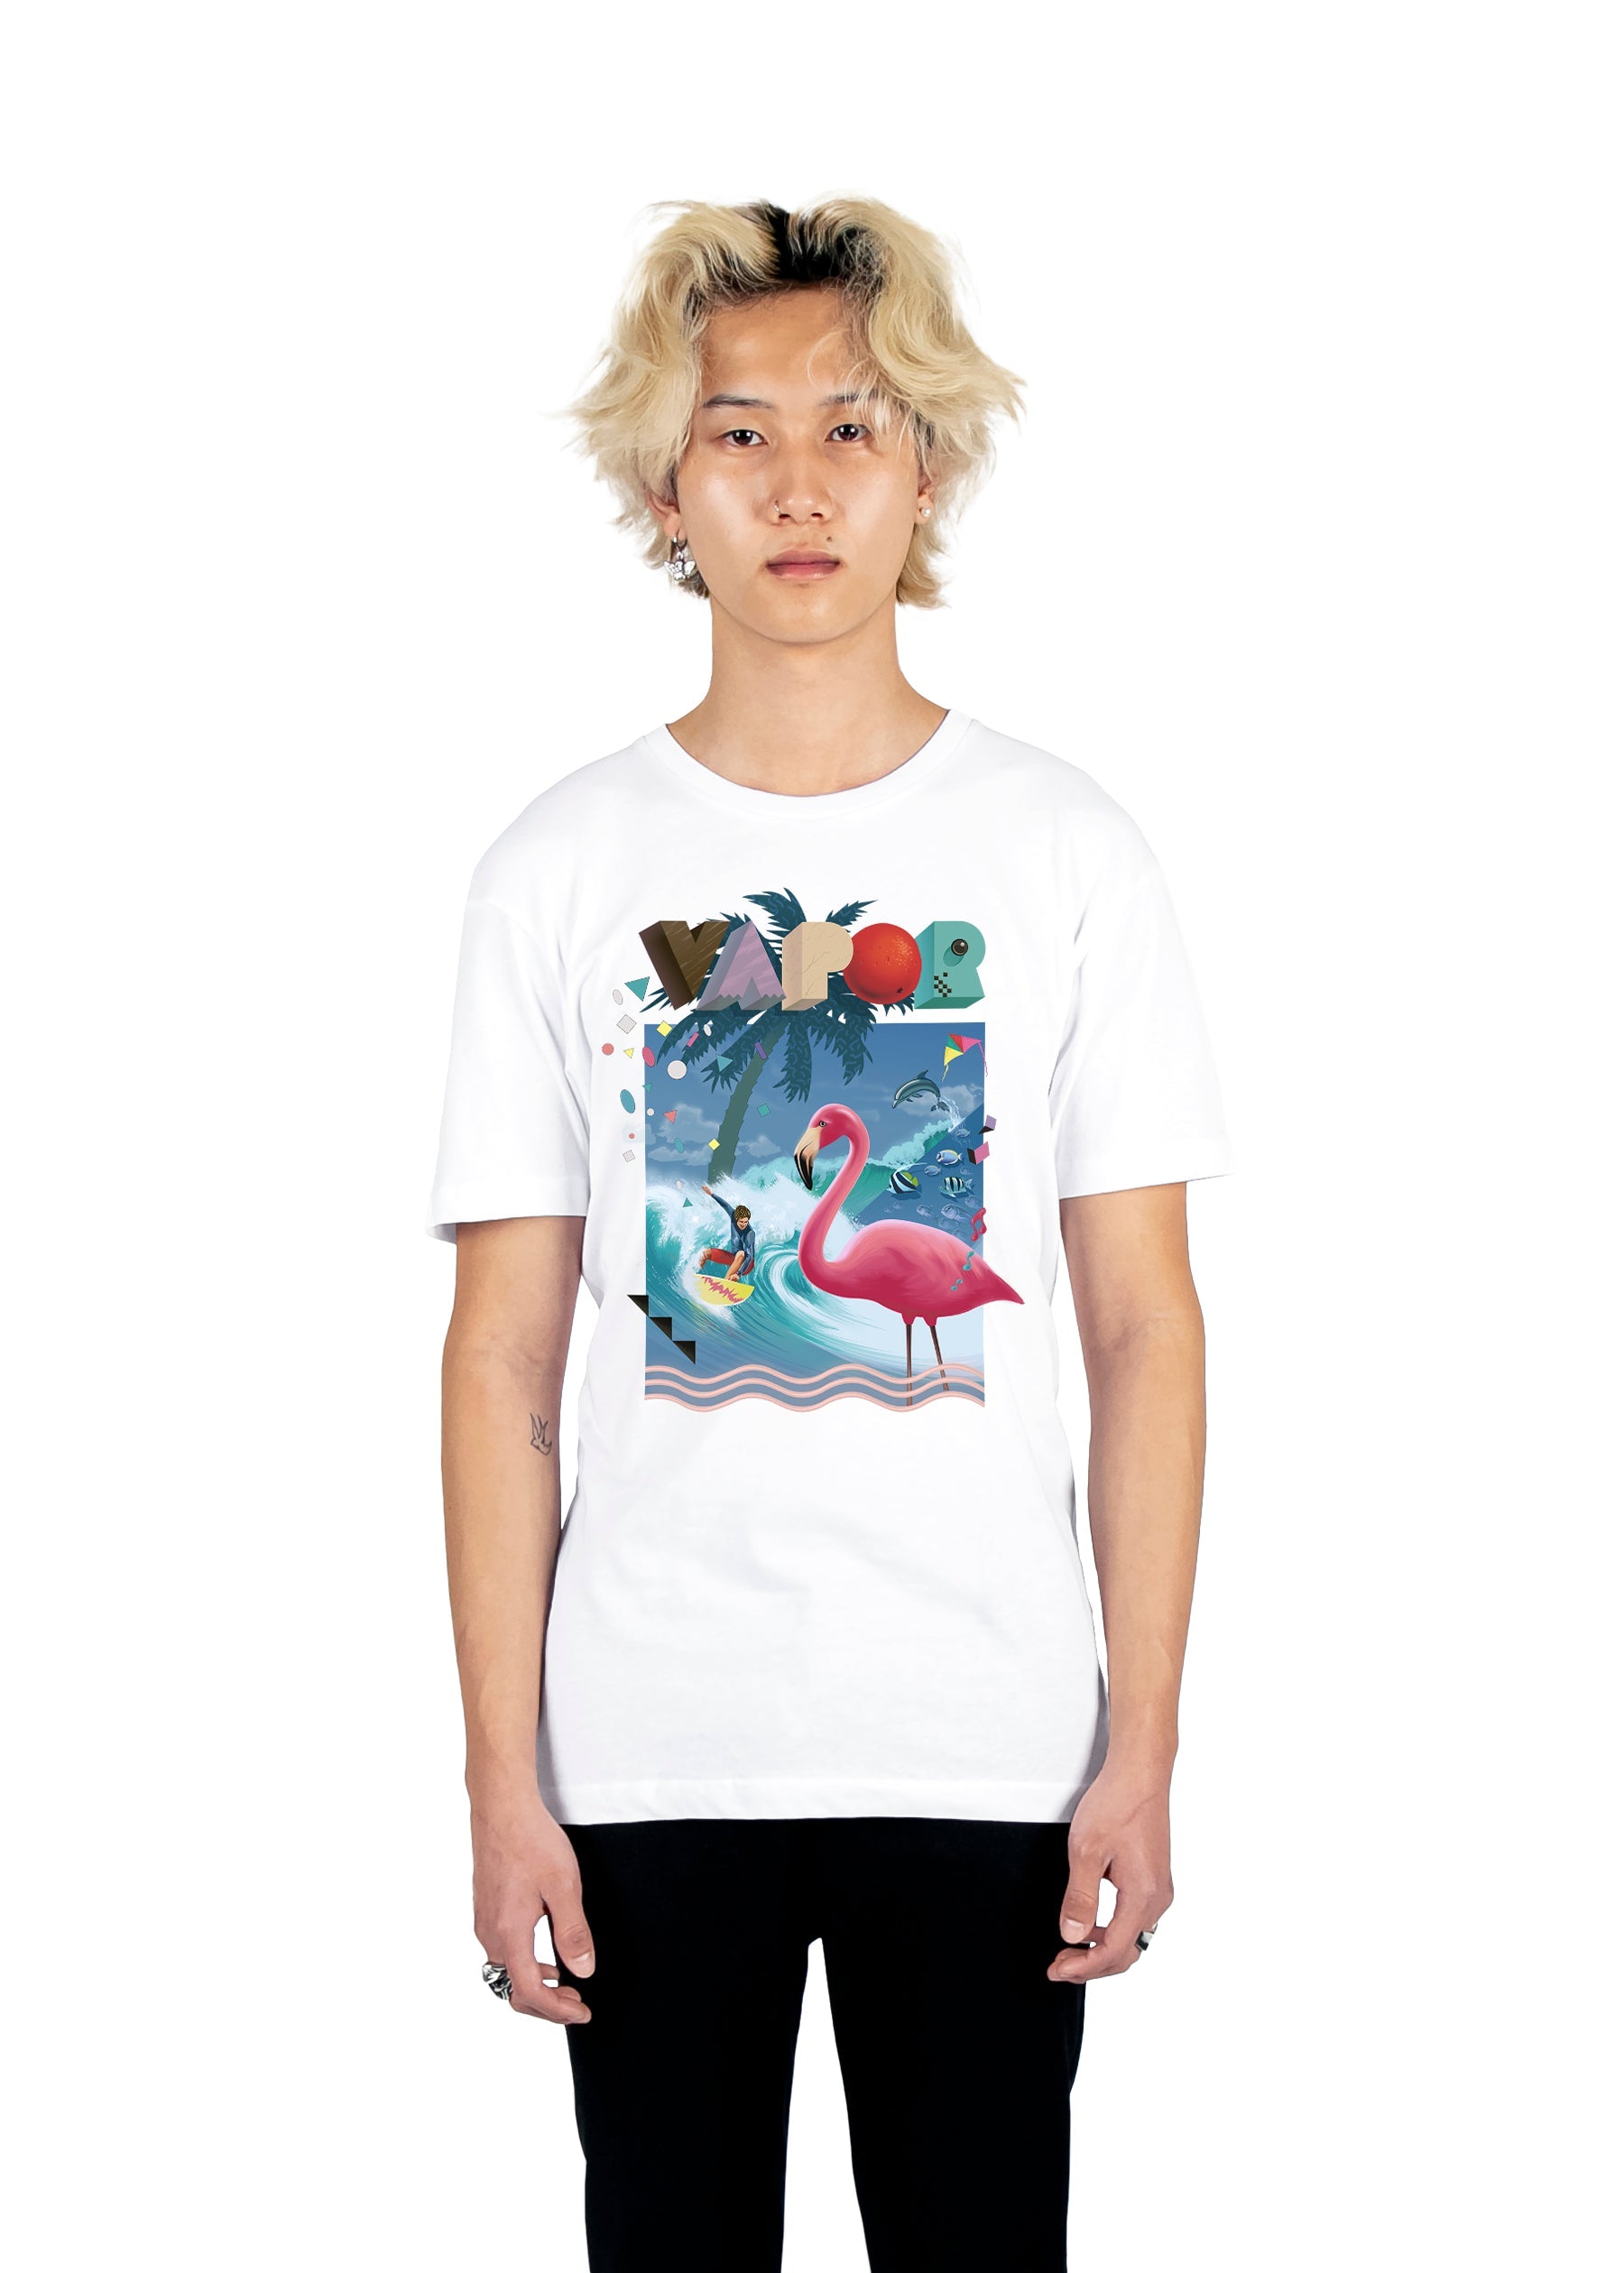 Ride The Wave Tee Graphic Tee DTG White S